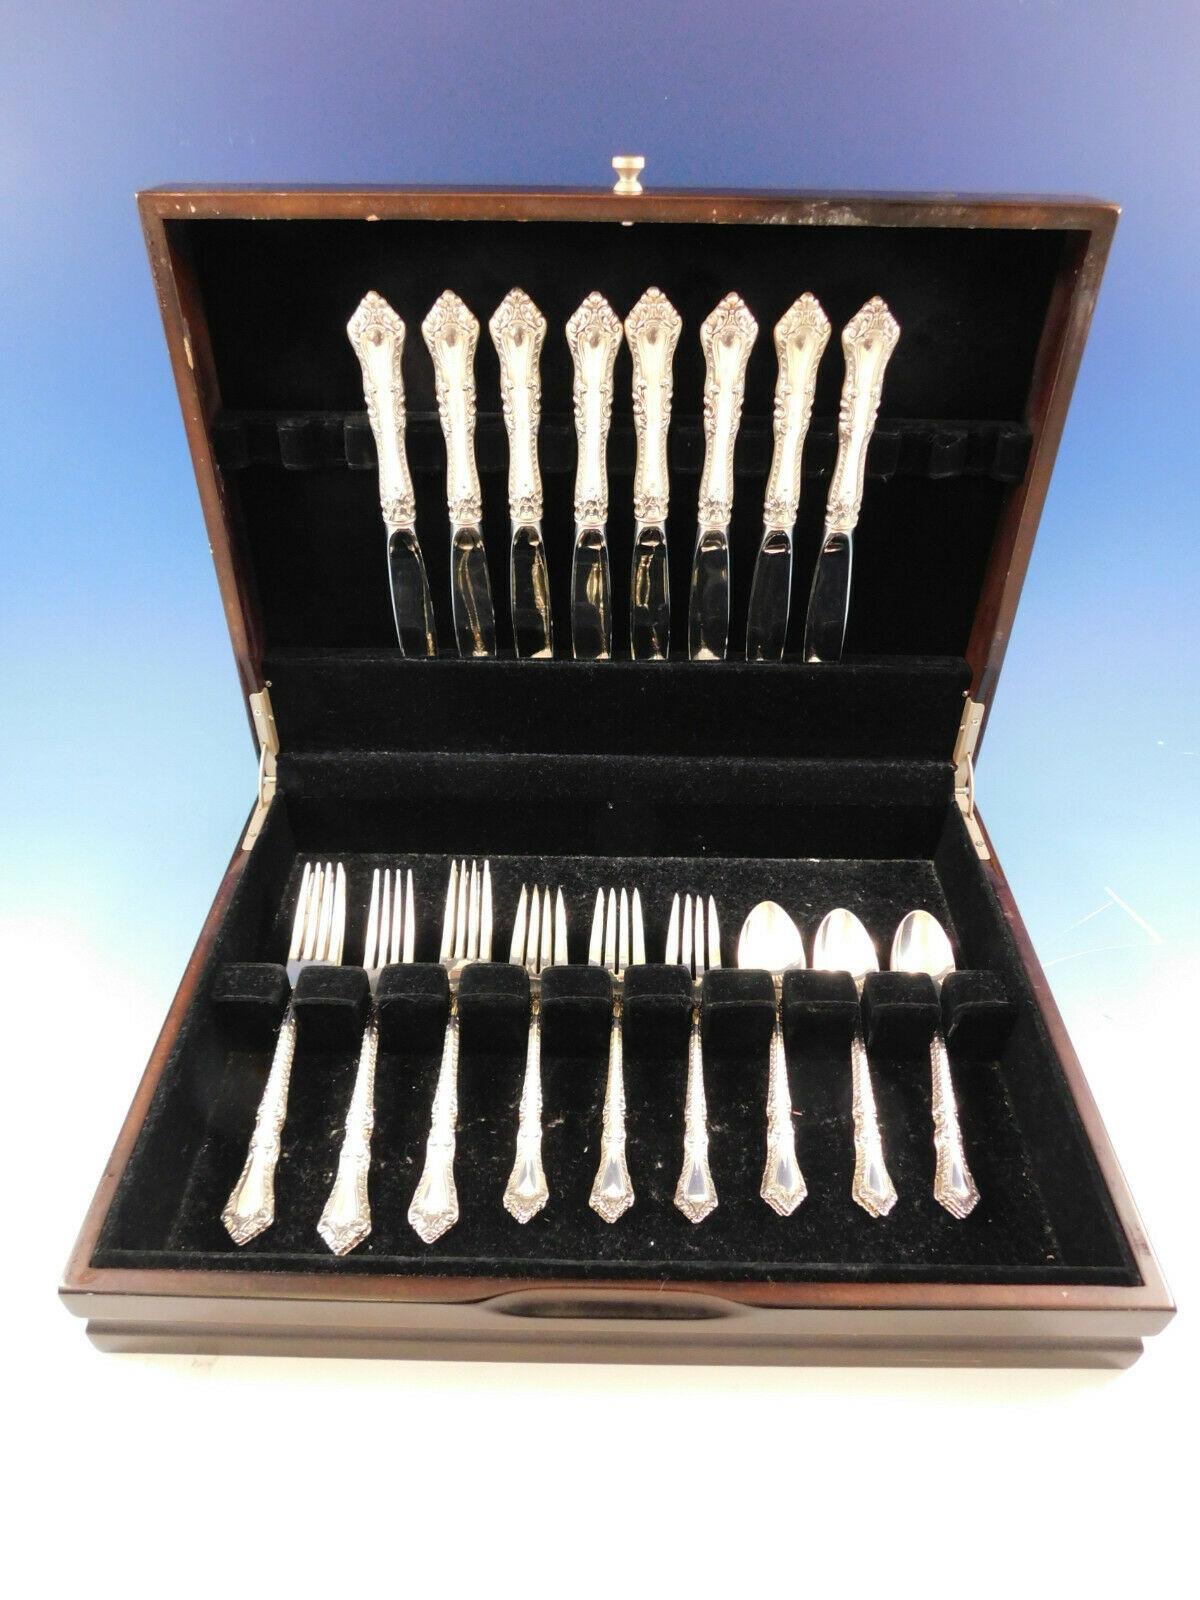 Heirloom quality Foxhall by Watson, circa 1942 Sterling silver flatware set, 32 pieces. This set includes:

8 knives, 9